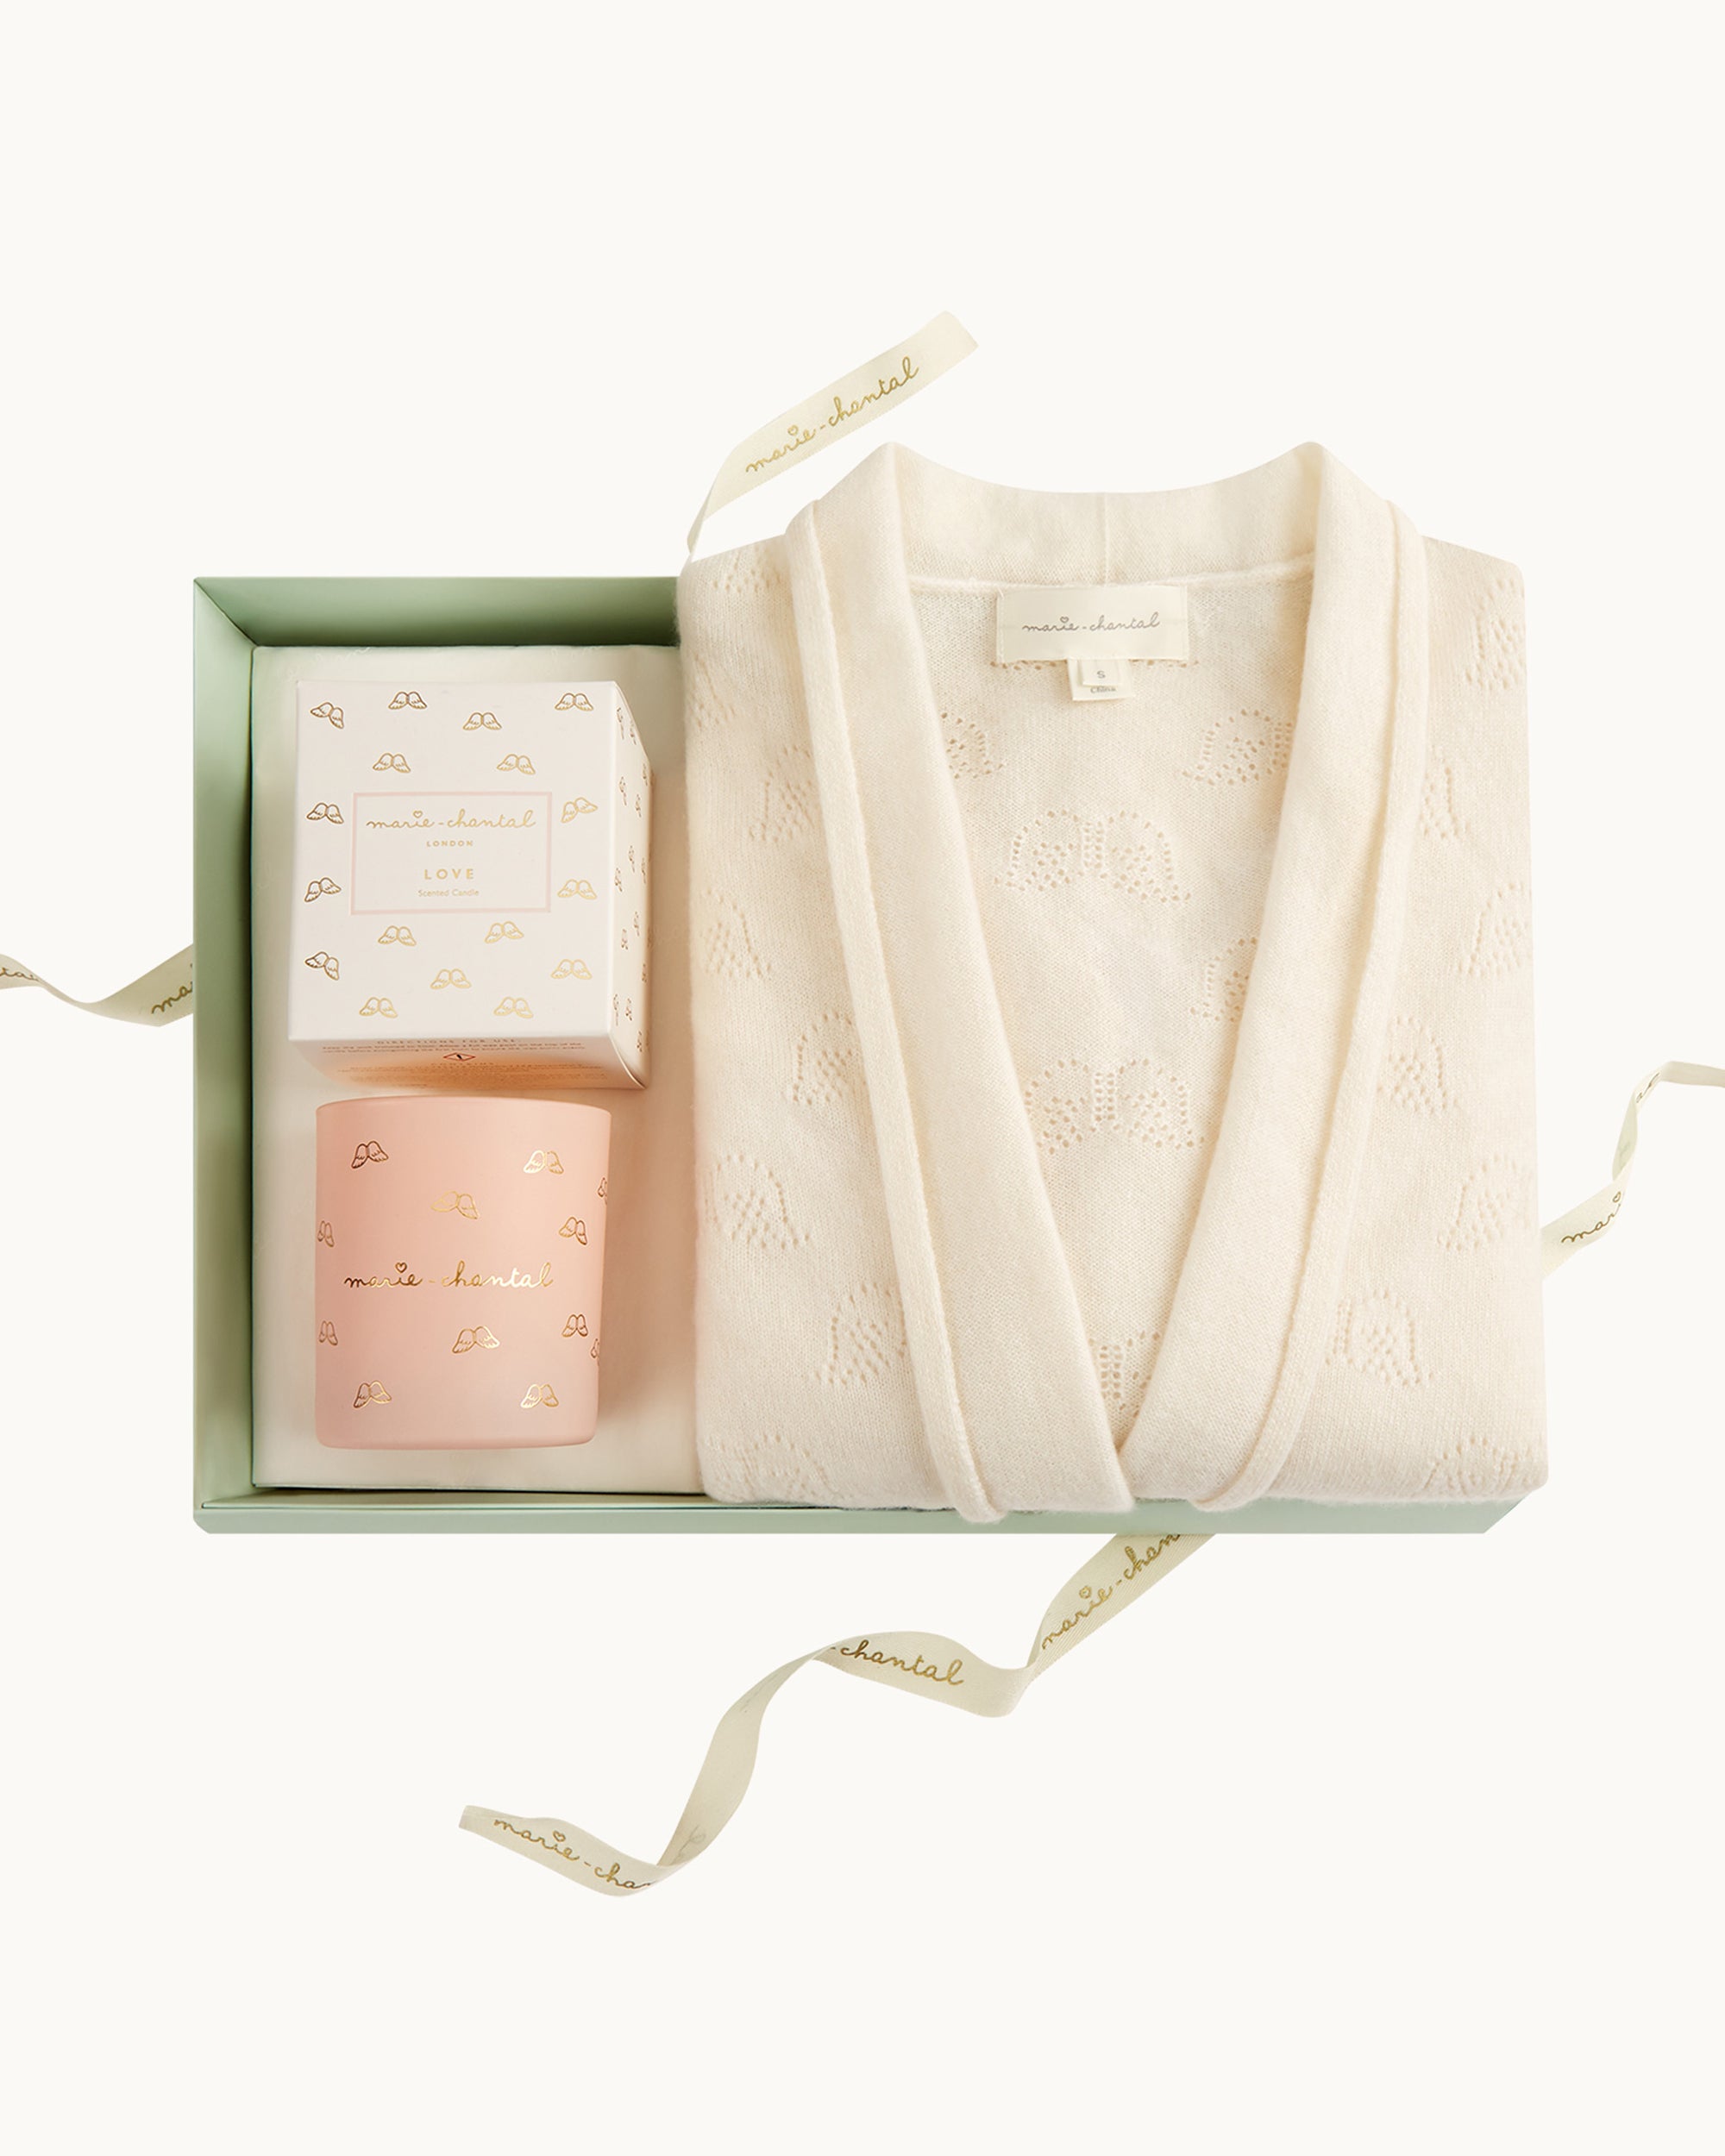 Something for Mama Cashmere Gift Set - Love